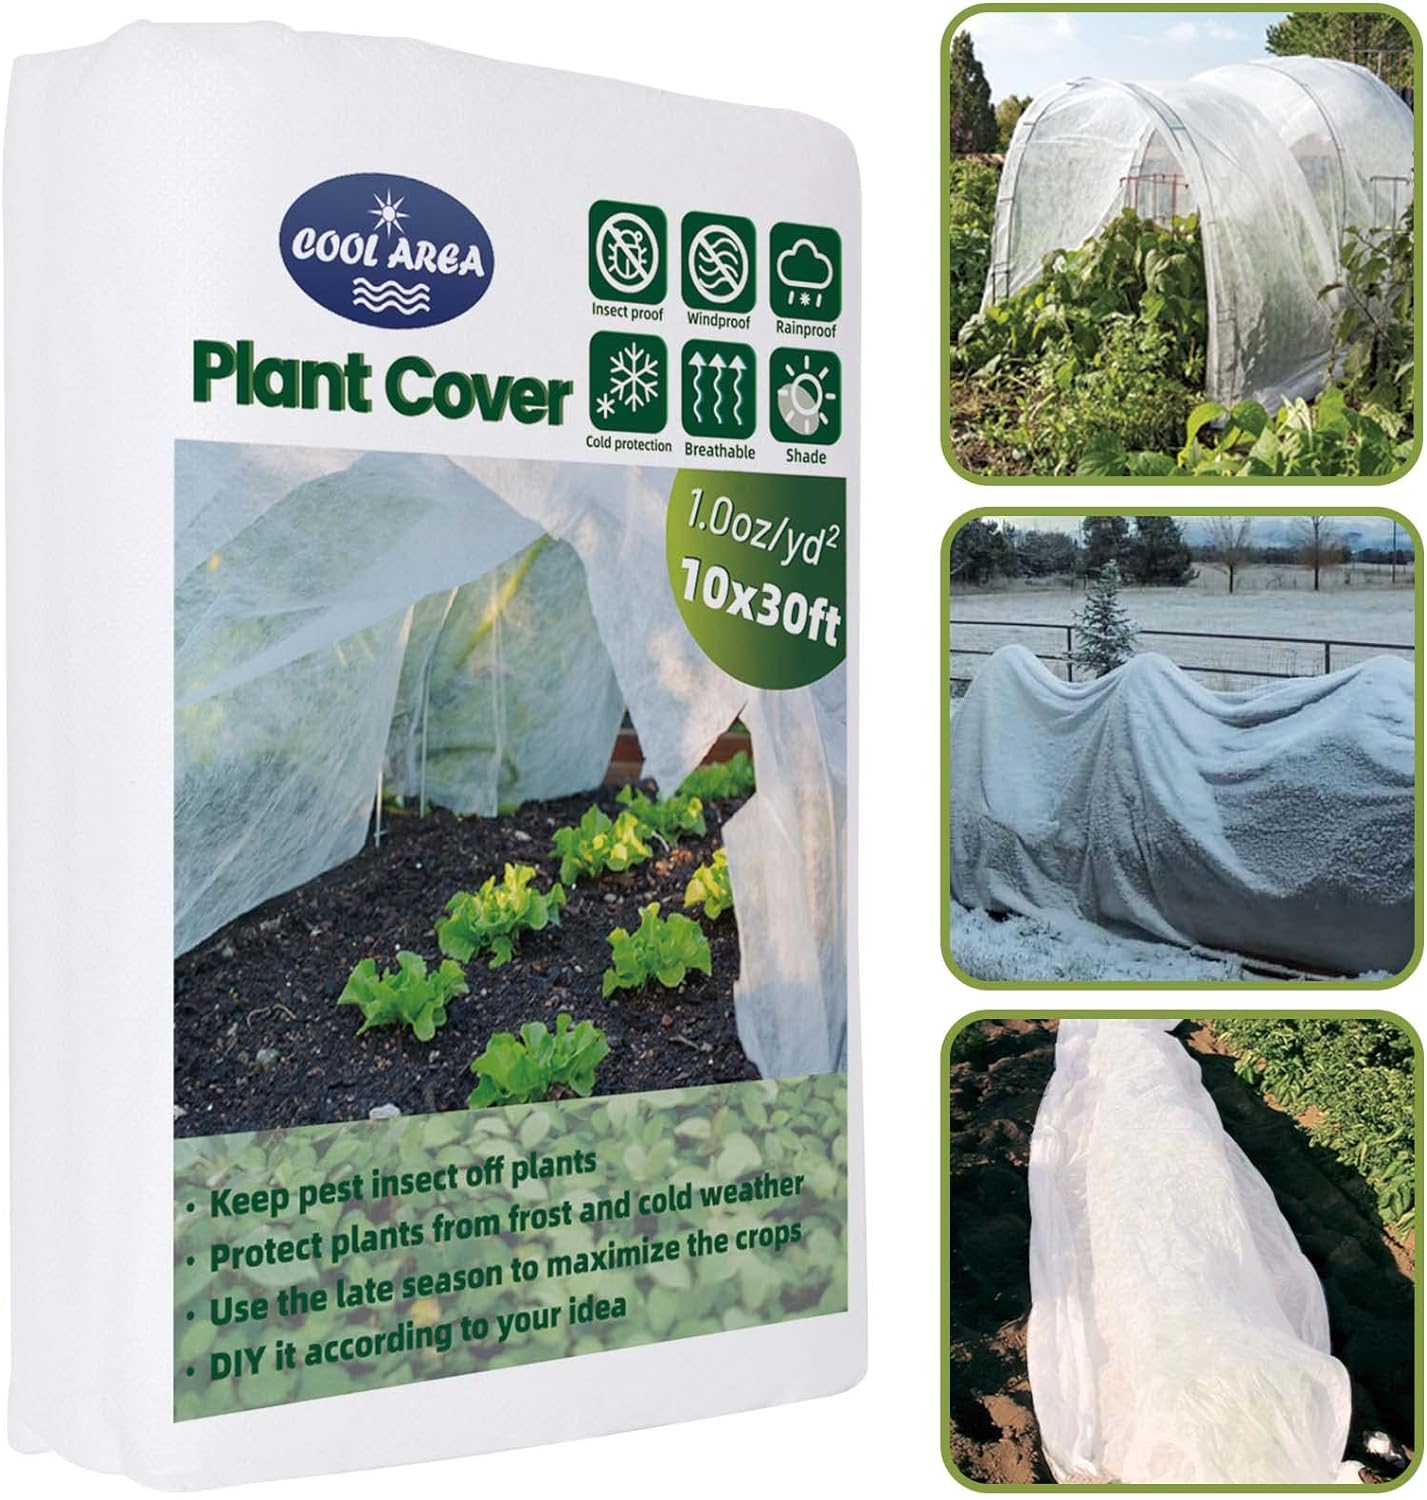 Amazon.com : Cool Area Plant Covers Freeze Protection 10x30 ft 1.0oz Resuable Frost Cloth Blanket Floating Row Cover Garden Fabric for Winter Outdoor Vegetables Plants Against Pest Insects : Patio, Lawn  Garden